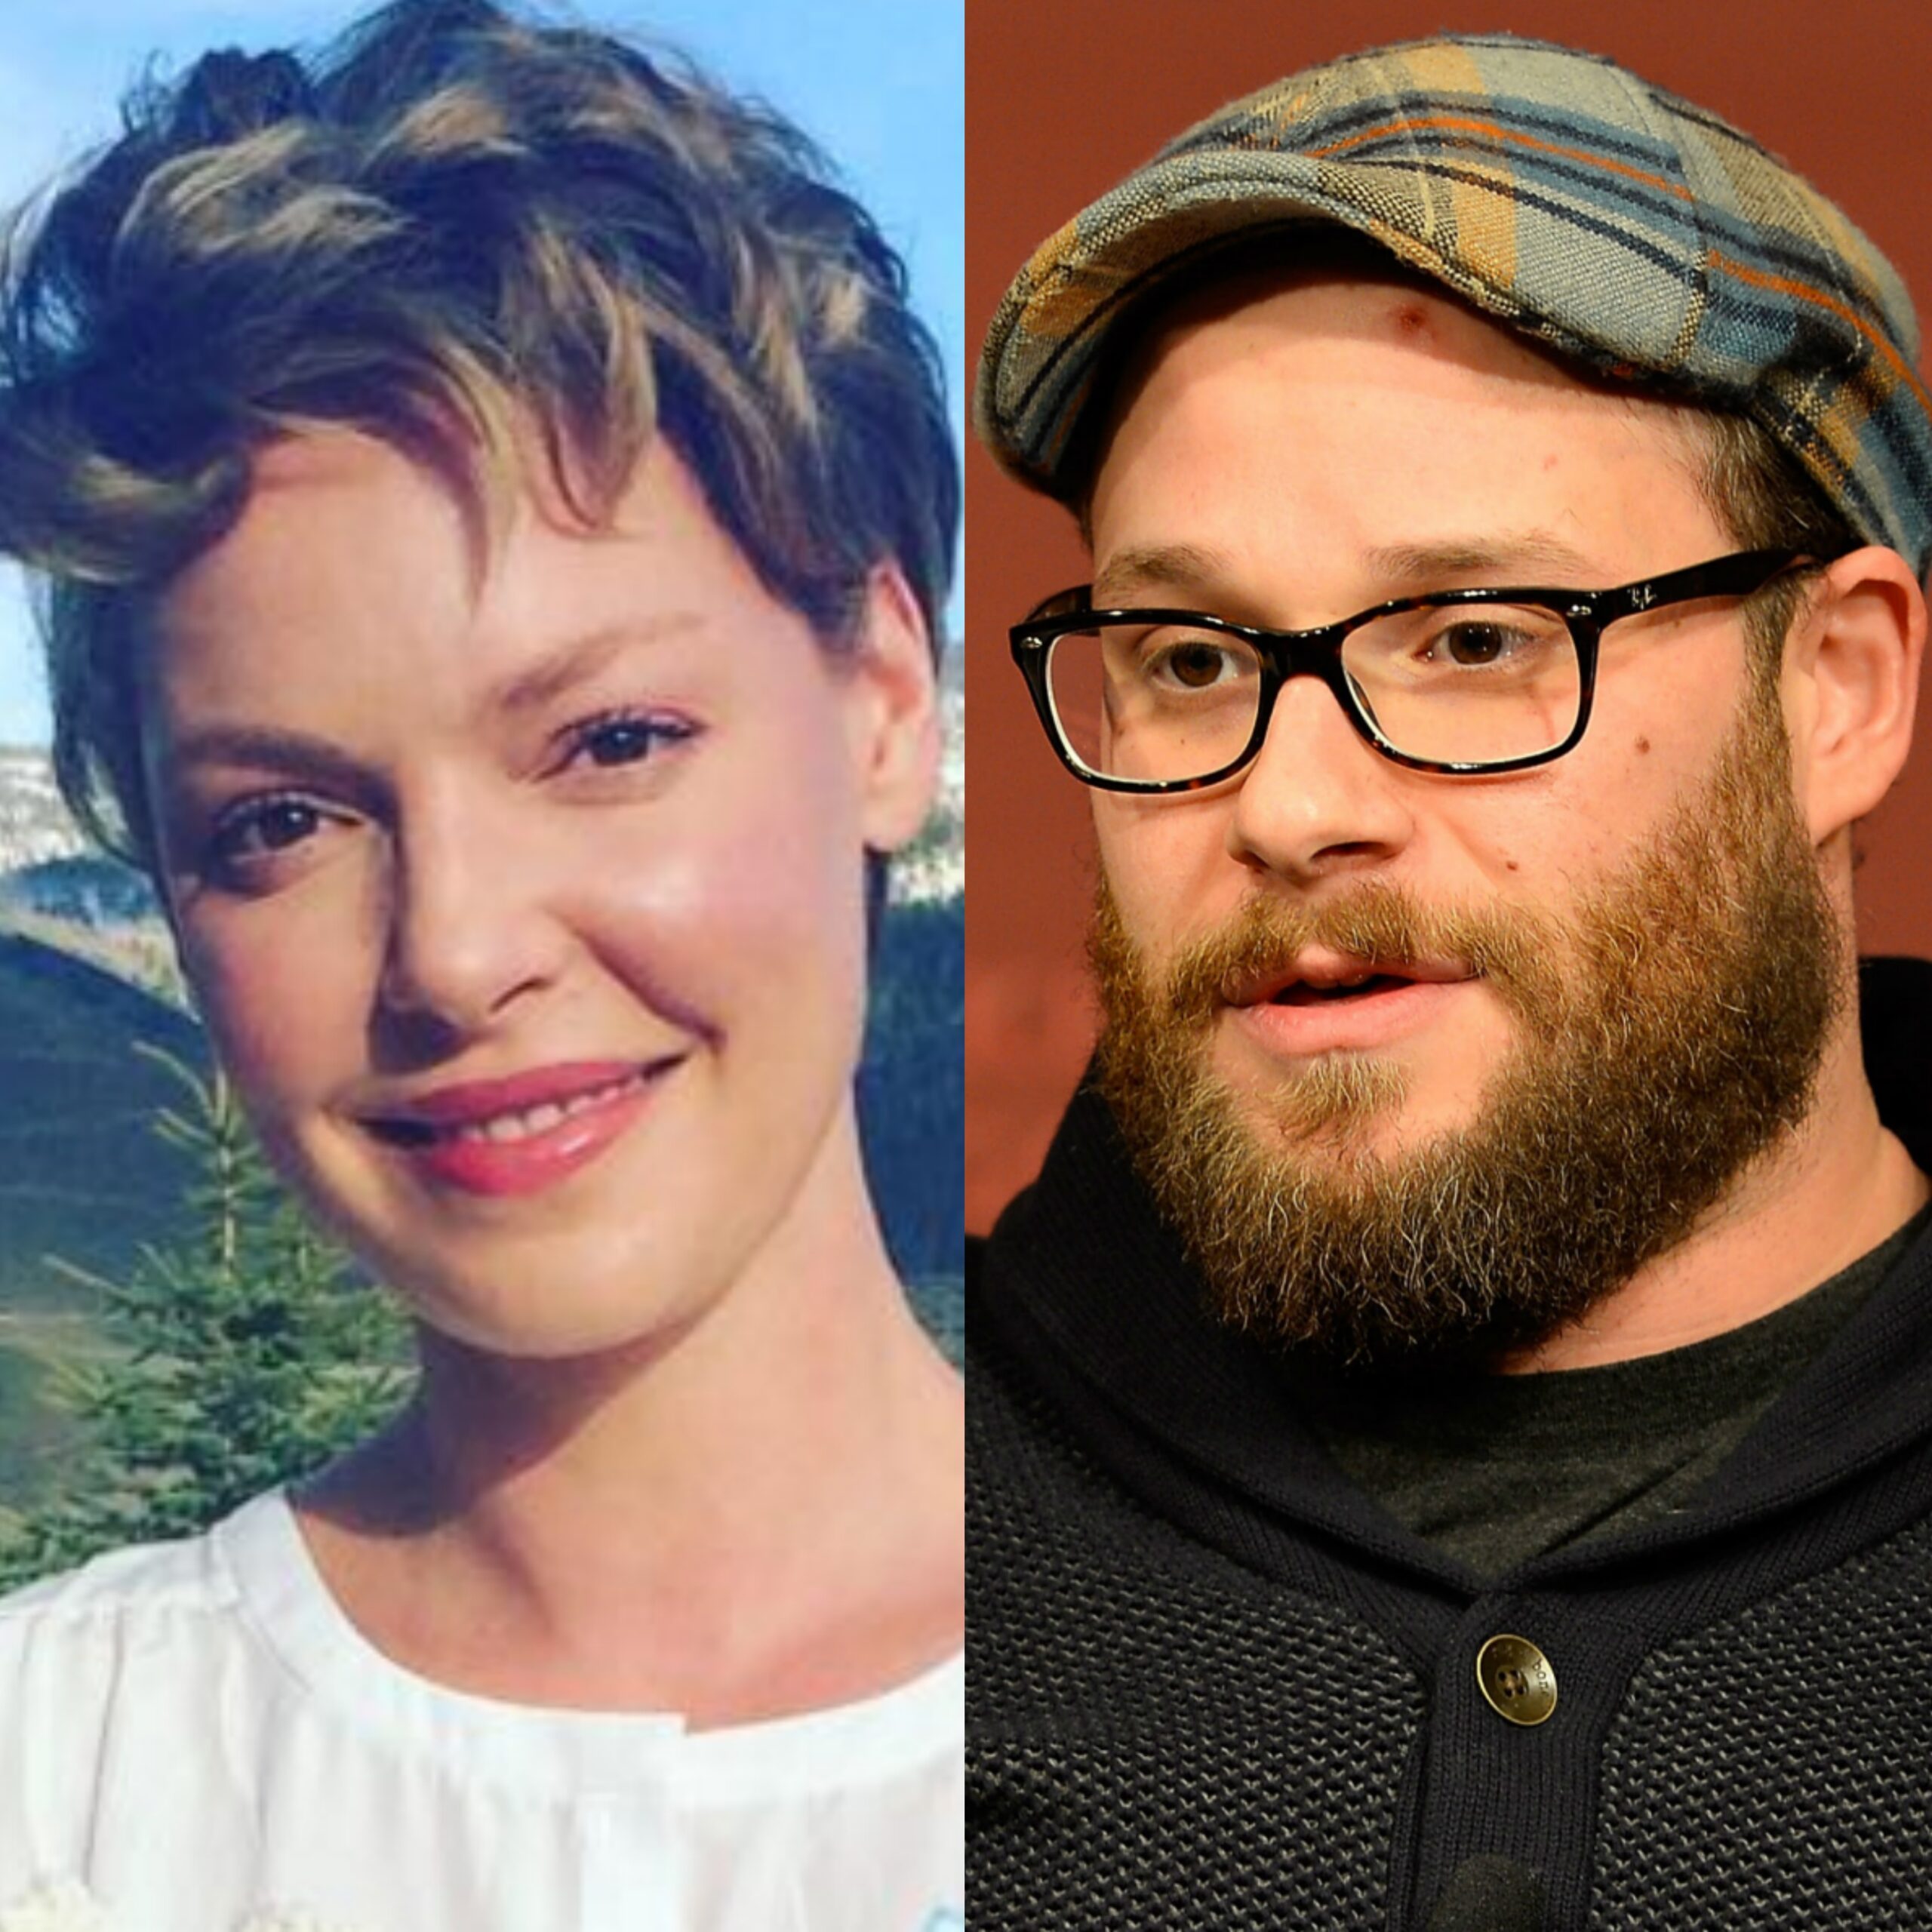 Seth Rogen speaks up on Katherine Heigl’s comments about ‘Knocked Up’